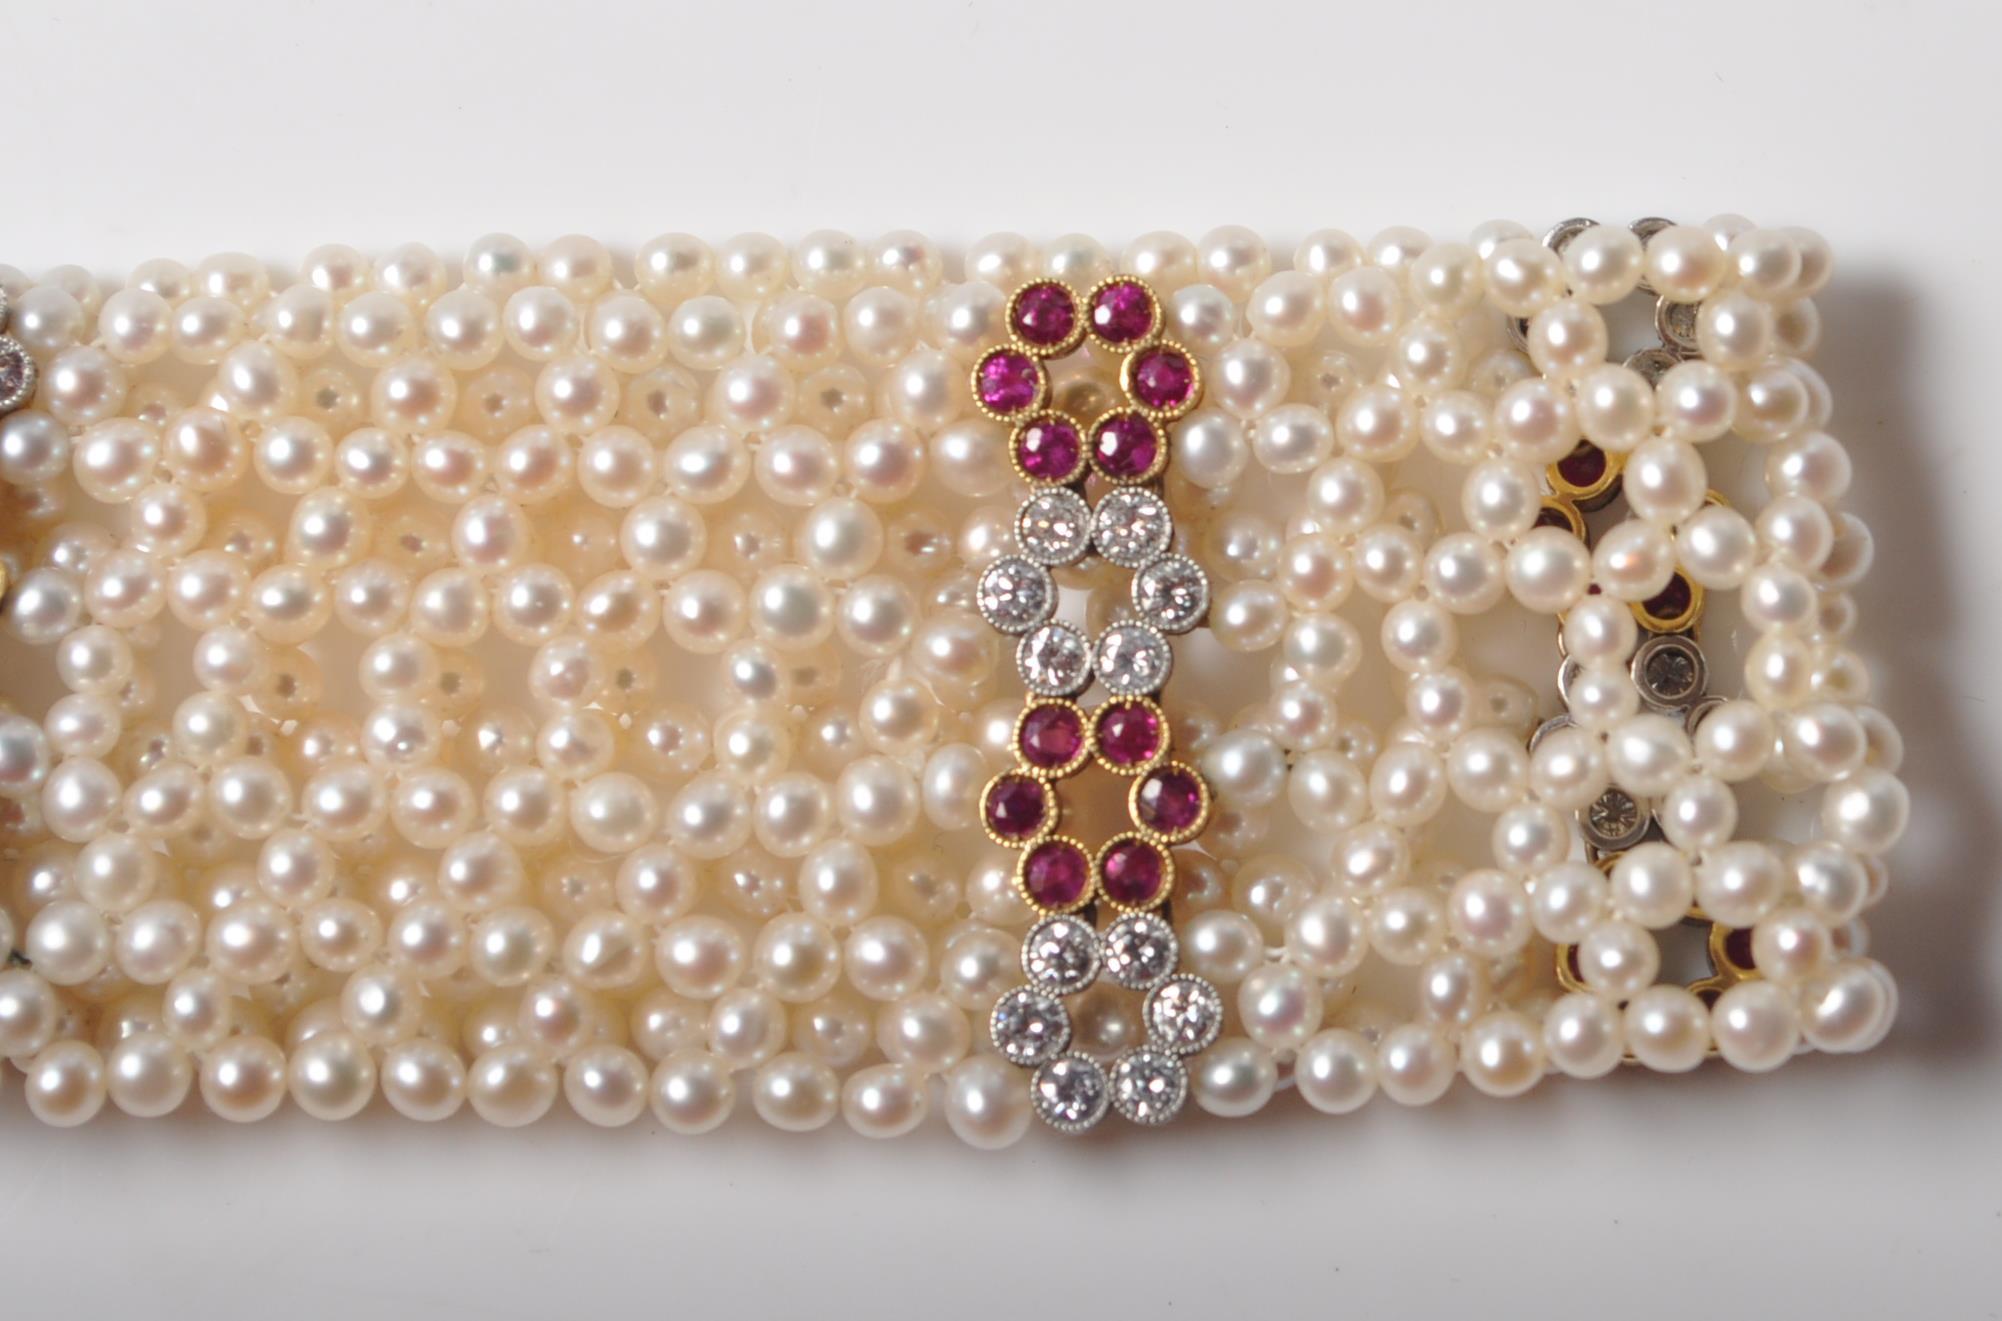 EDWARDIAN CULTURED PEARL RUBY AND DIAMOND CHOKER NECKLACE - Image 9 of 9